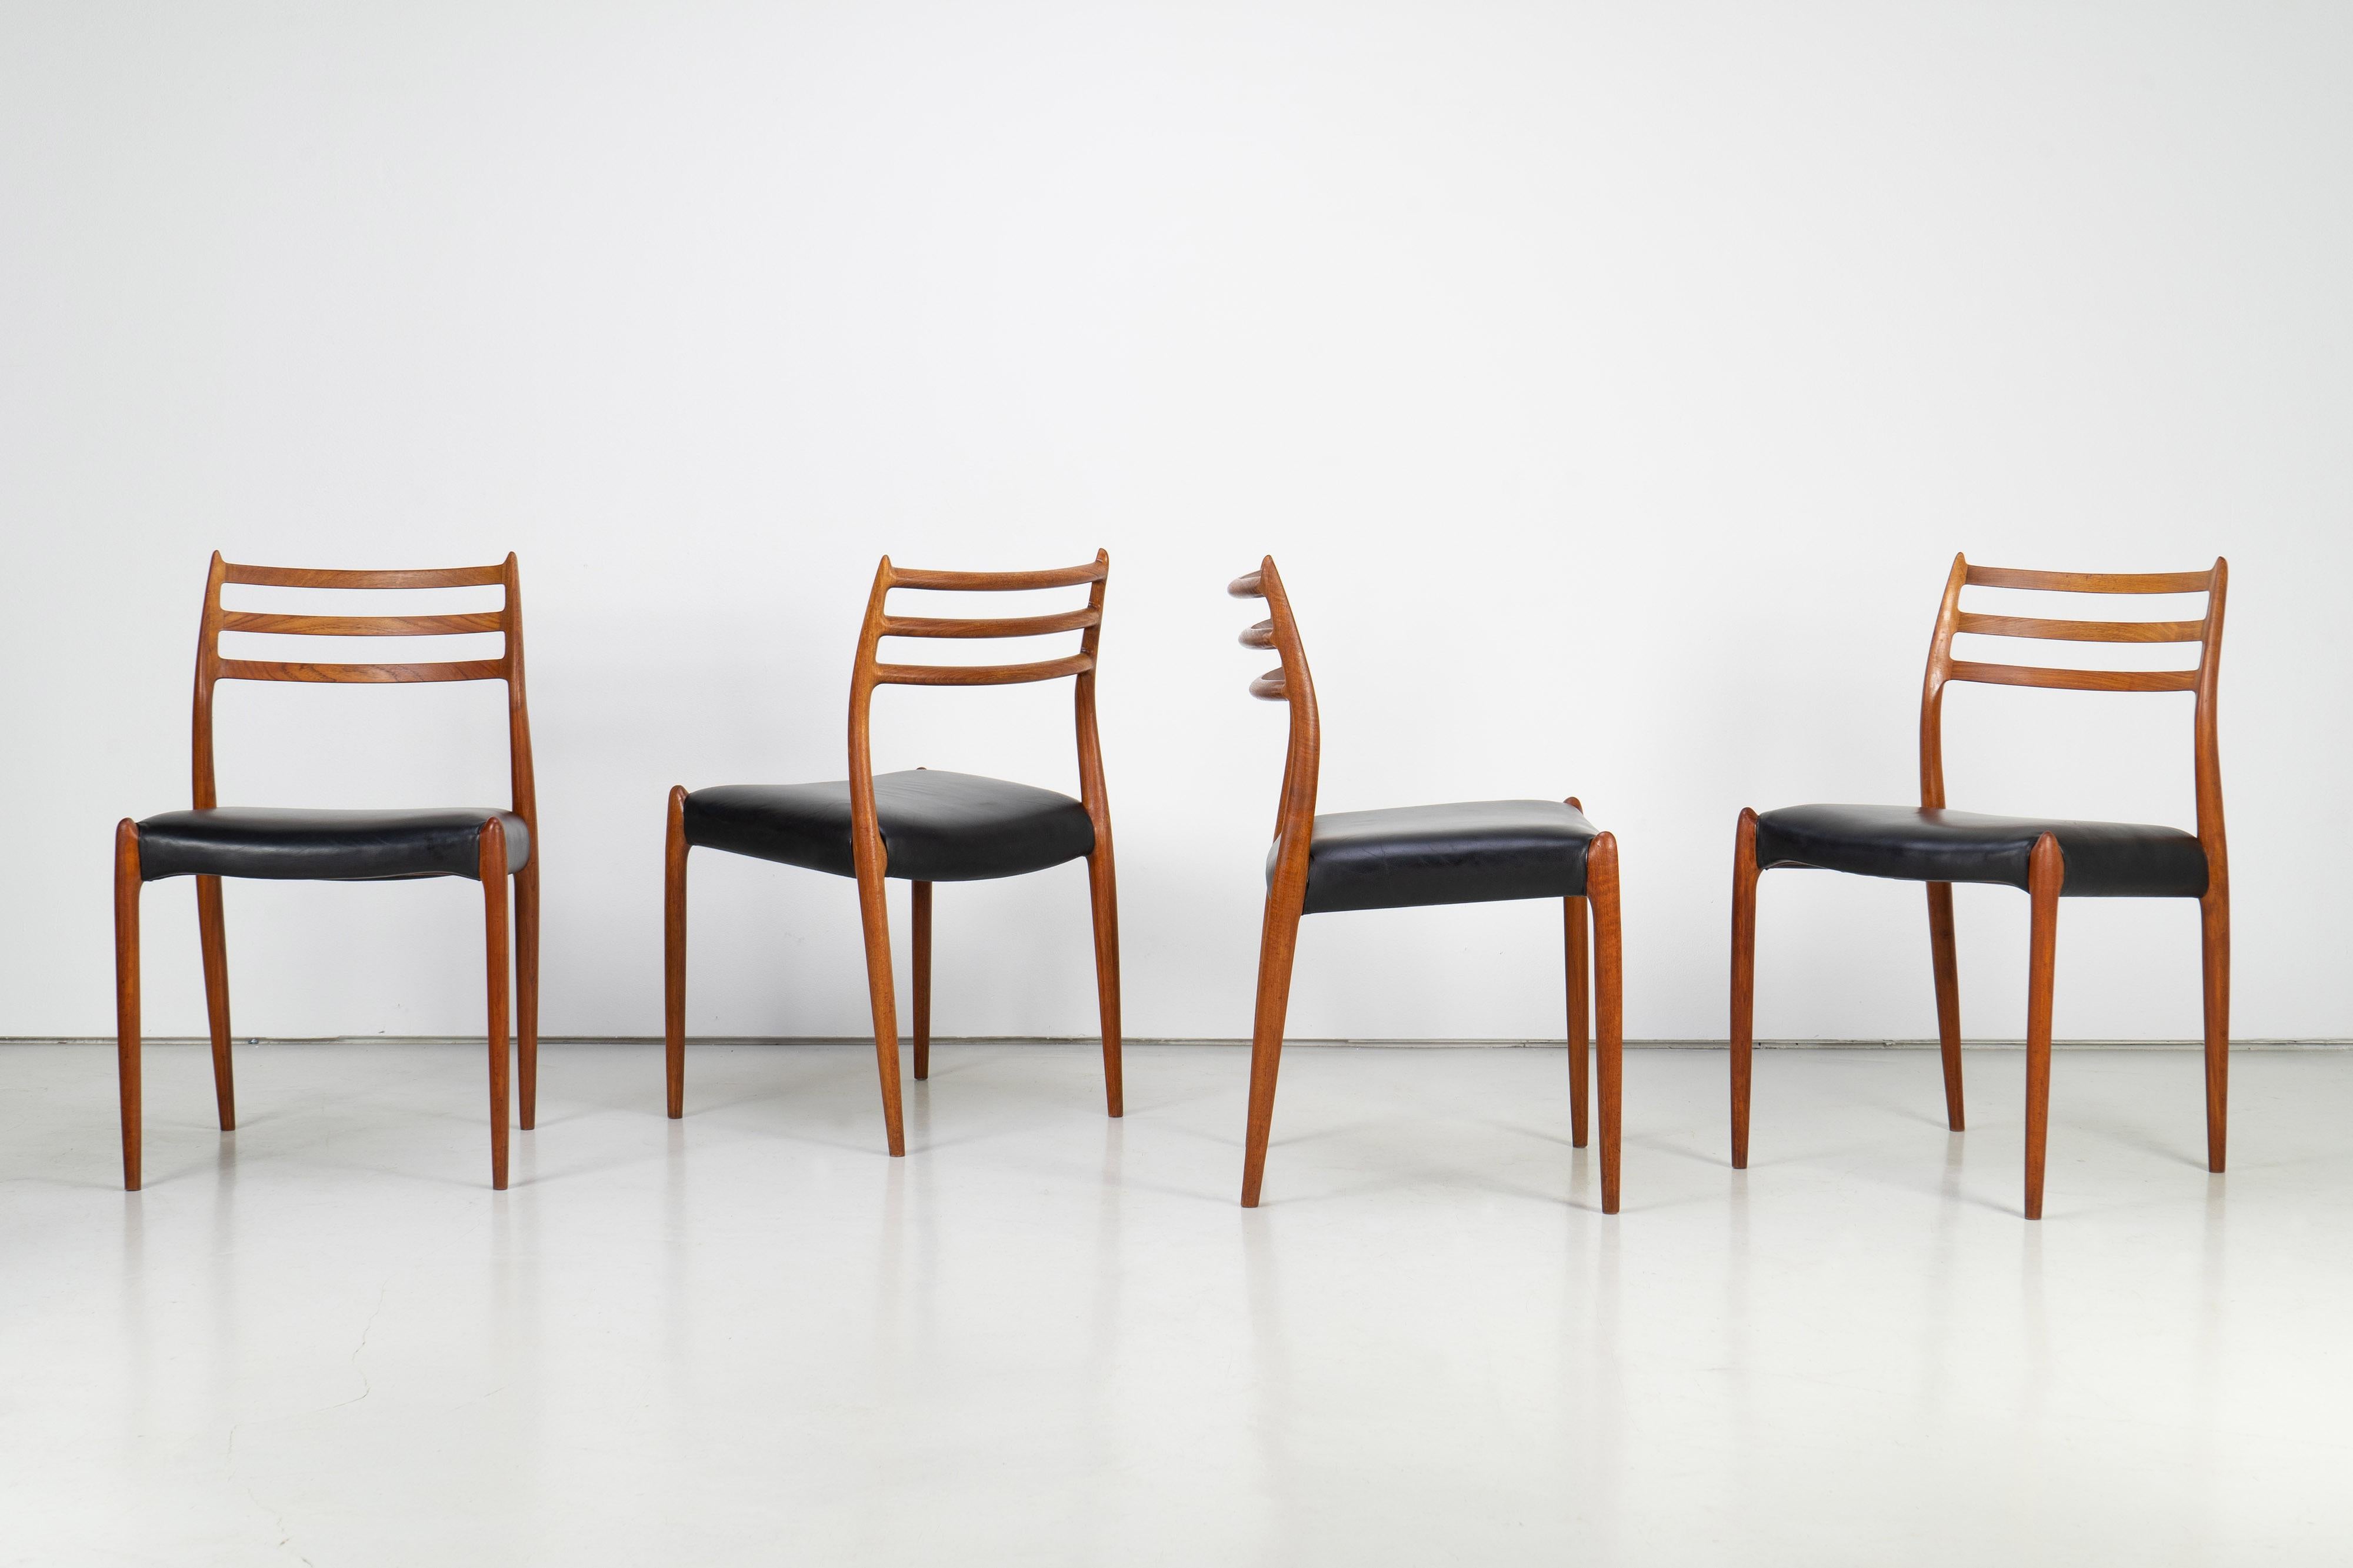 Set of four sophisticated dining chairs designed by Niels O. Møller. All chairs are of premium quality. The organic frames are made of real teakwood, upholstered with leather.